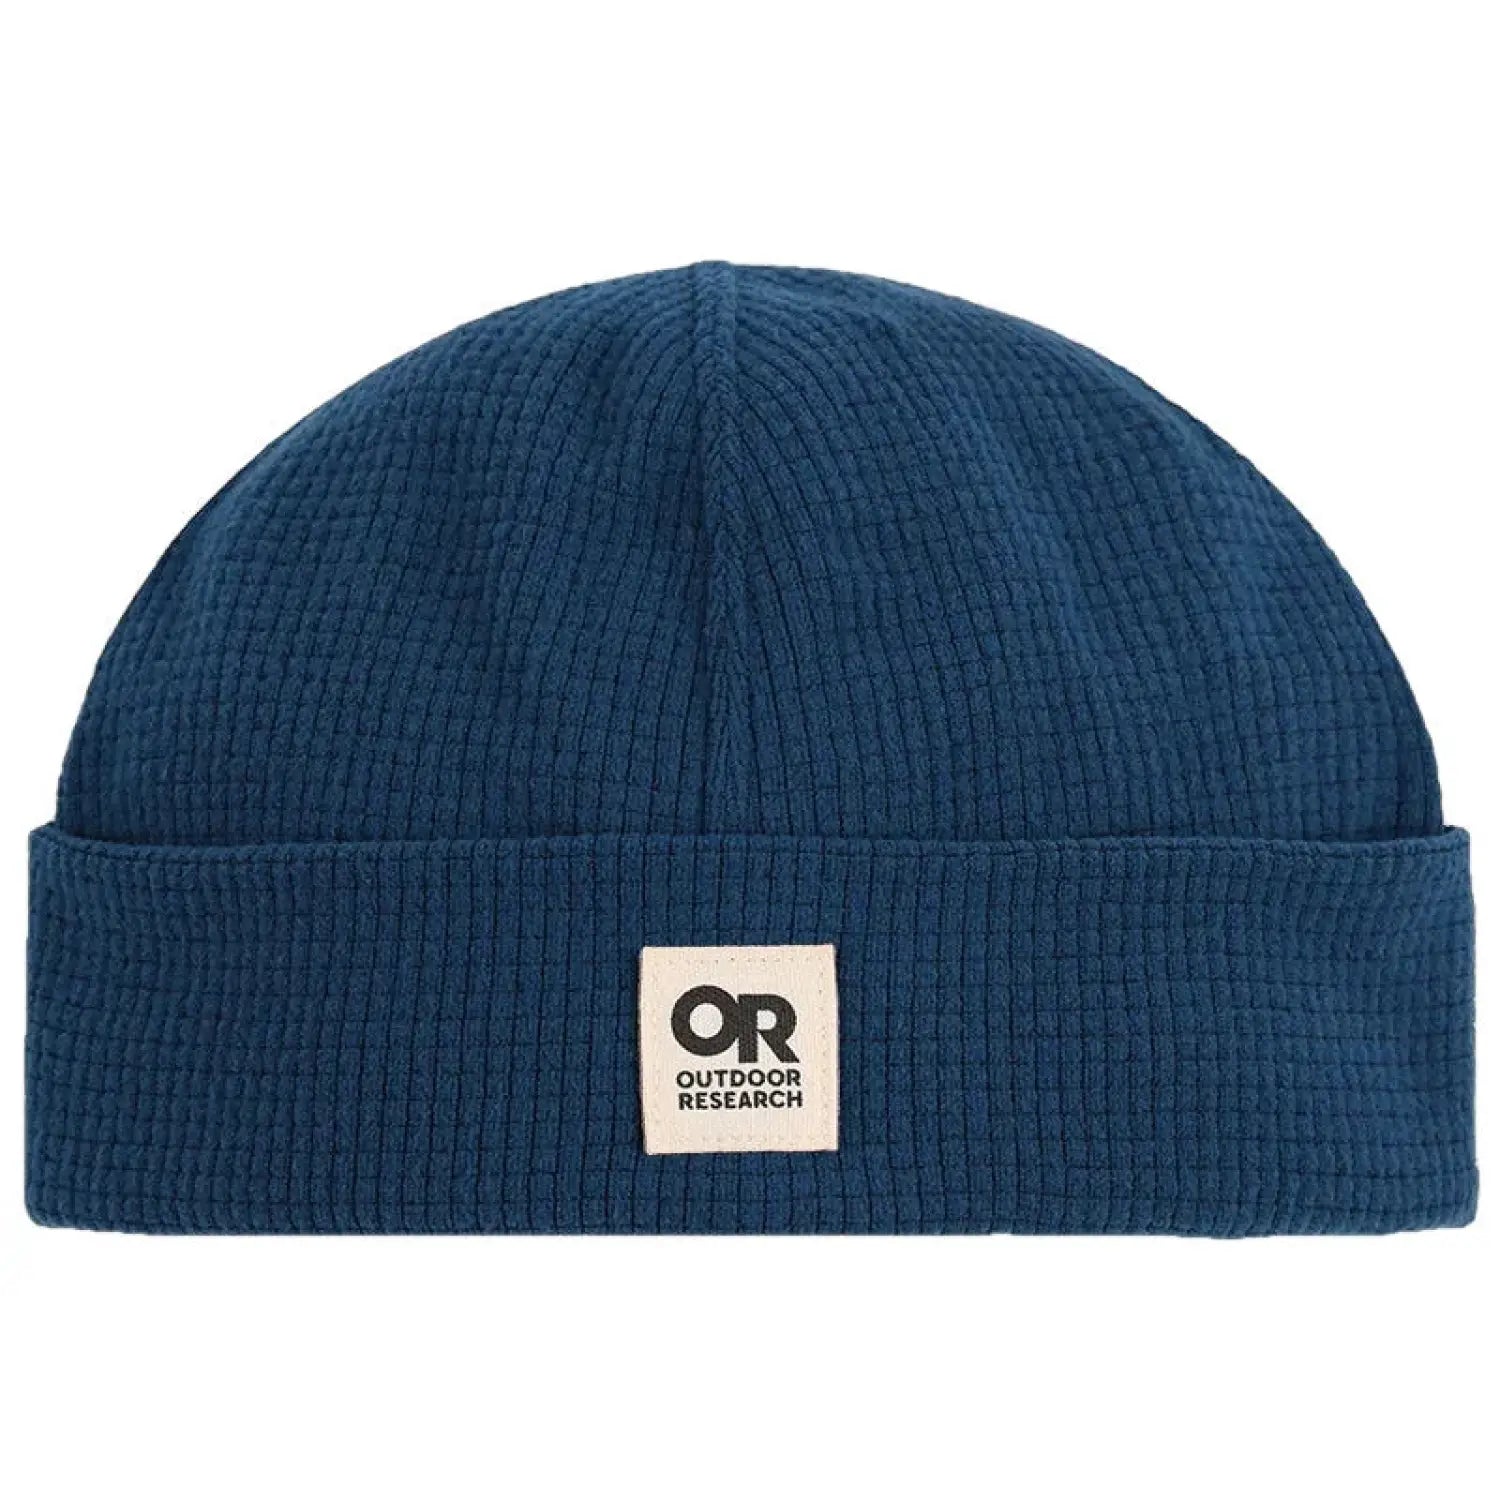 Outdoor Research Trail Mix Beanie, Harbor, front view 